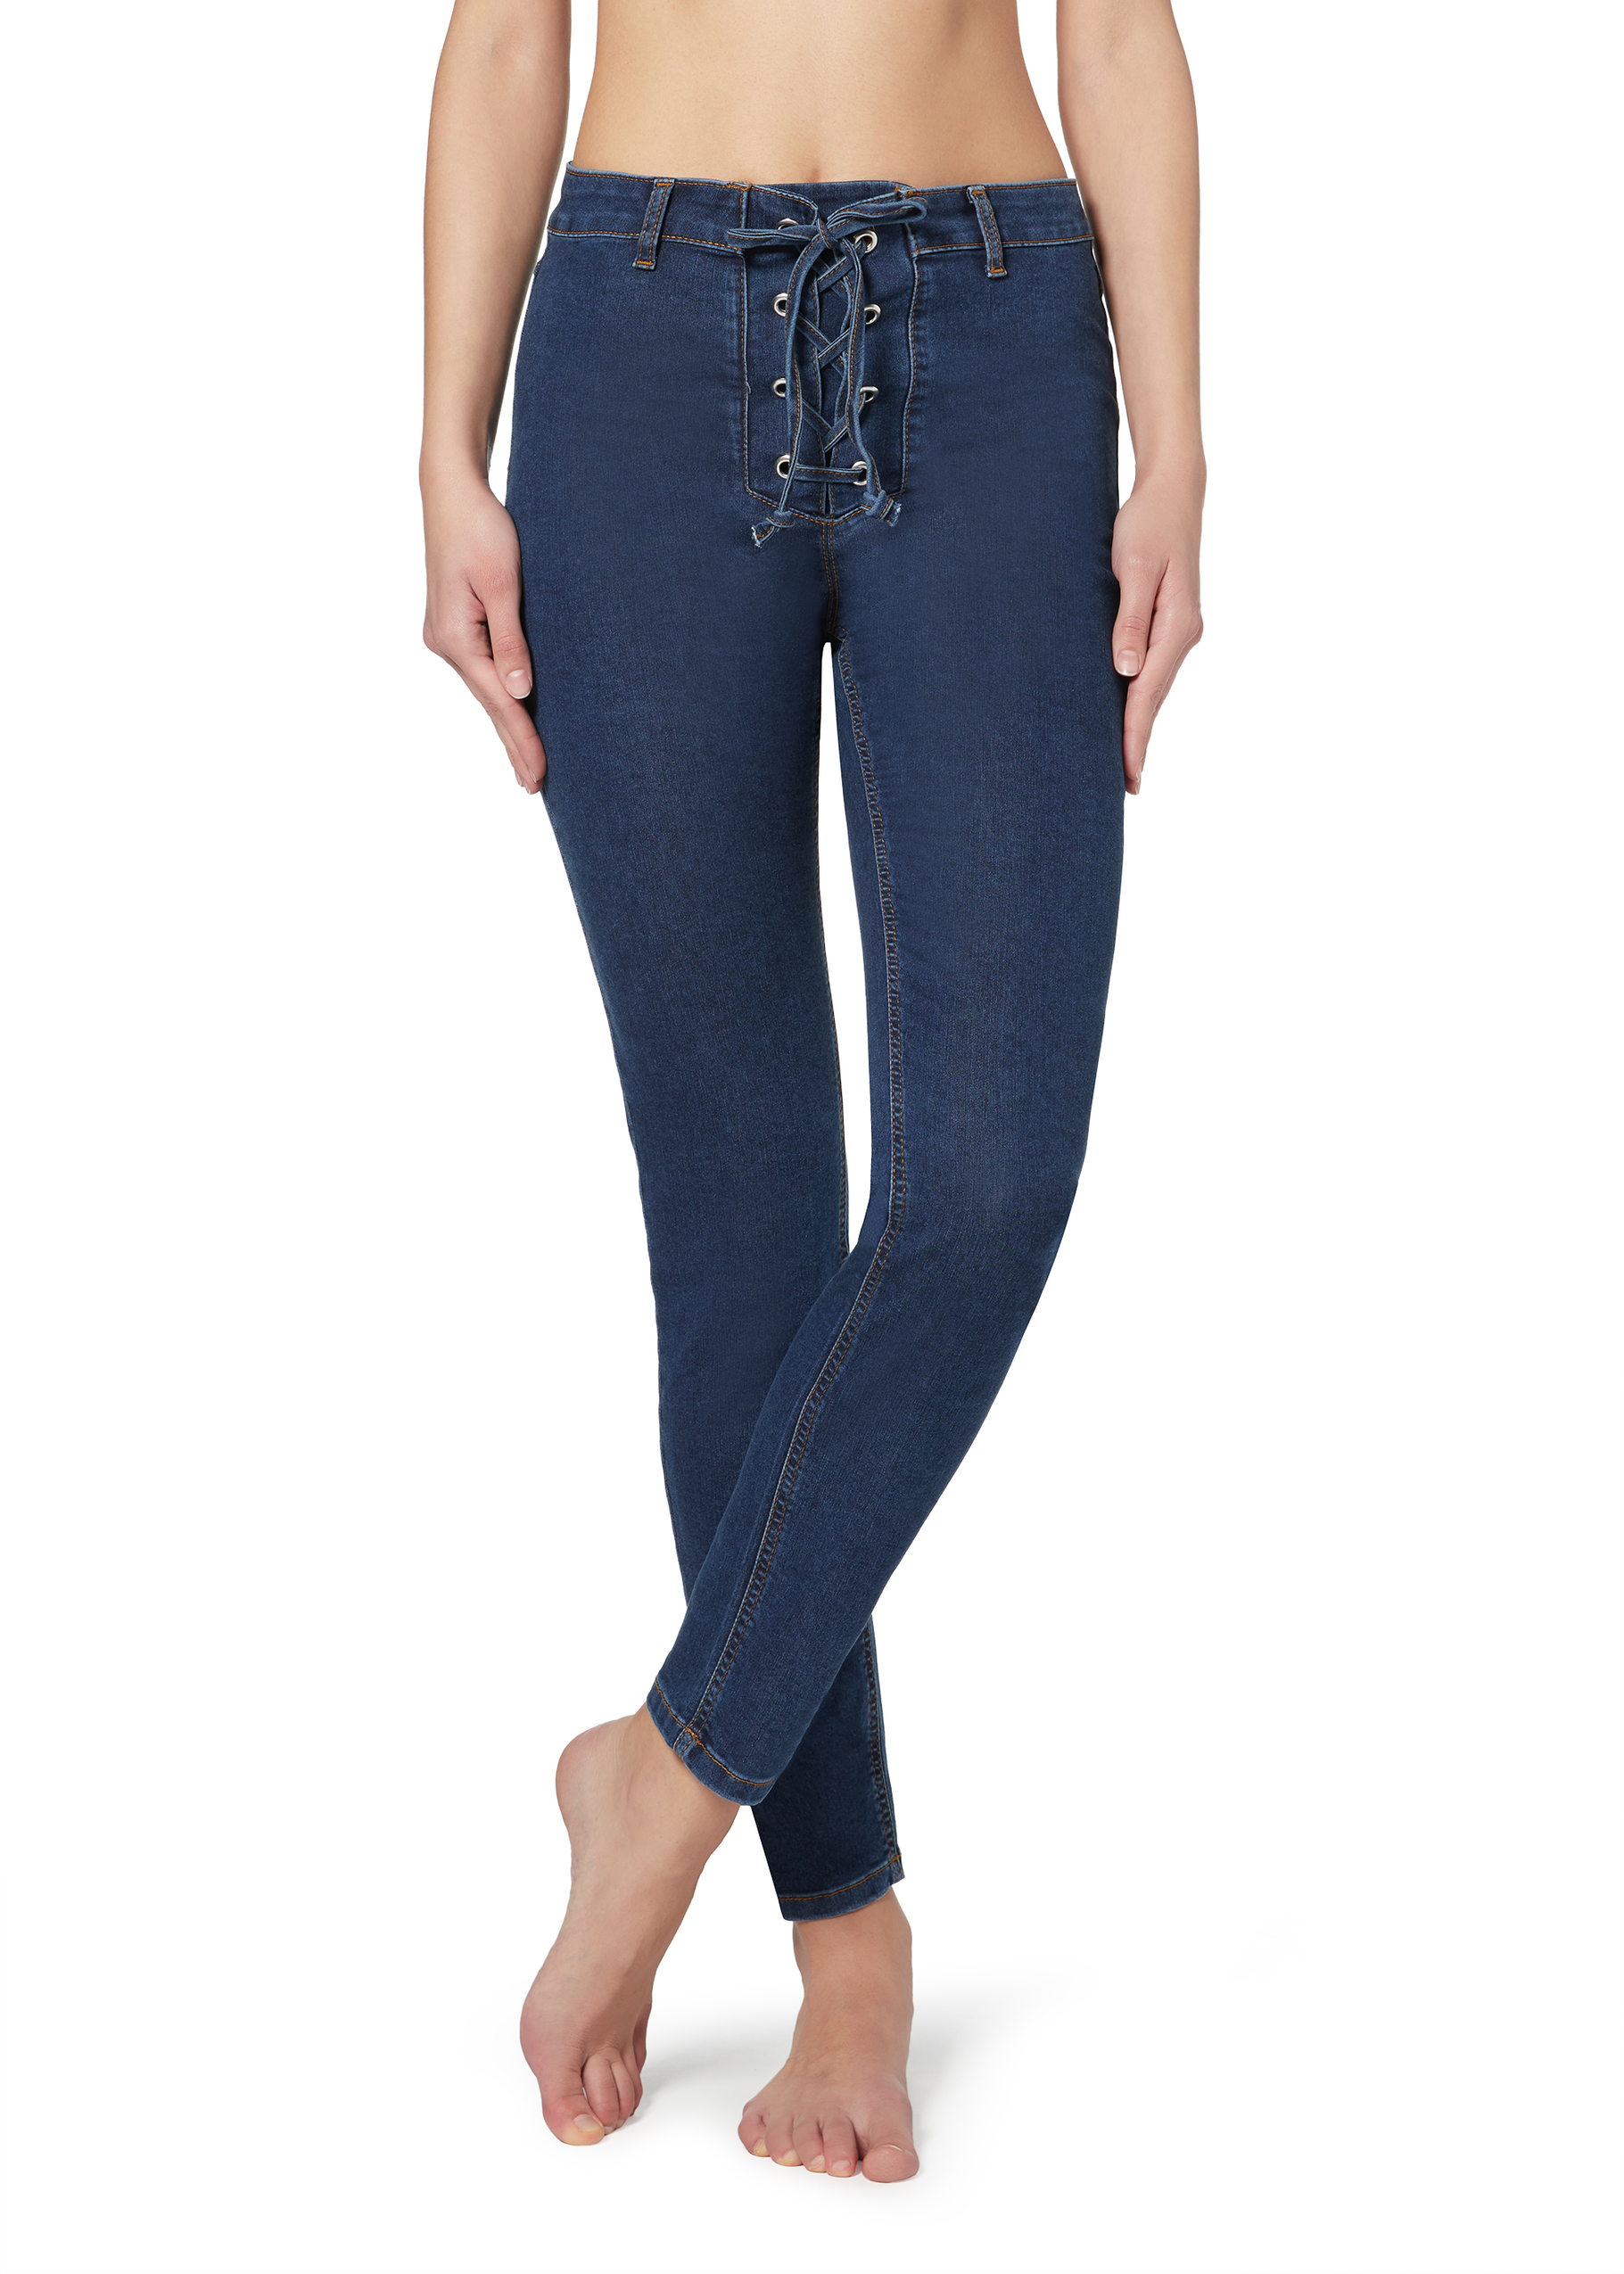 Denim leggings with crisscross pattern and detail at the waist - Jeans -  Calzedonia